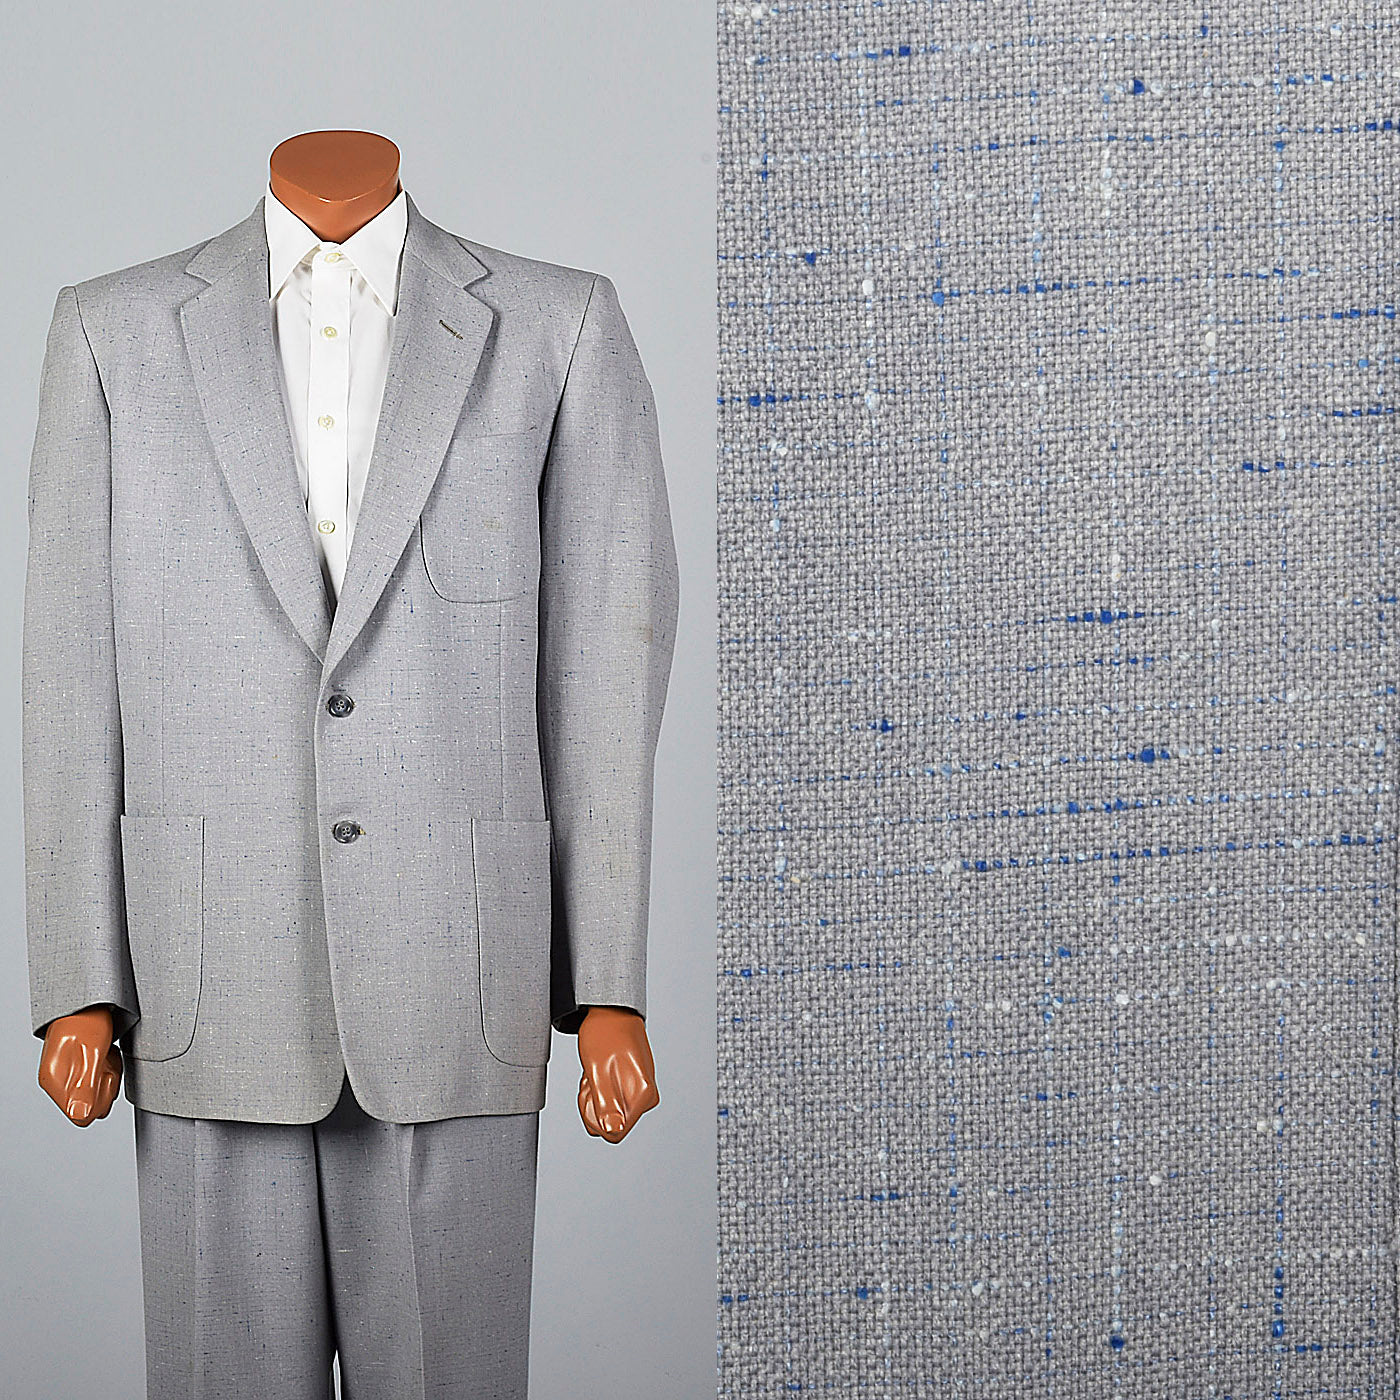 1950s Mens Two Piece Suit in Dove Gray with Blue & White Flecks